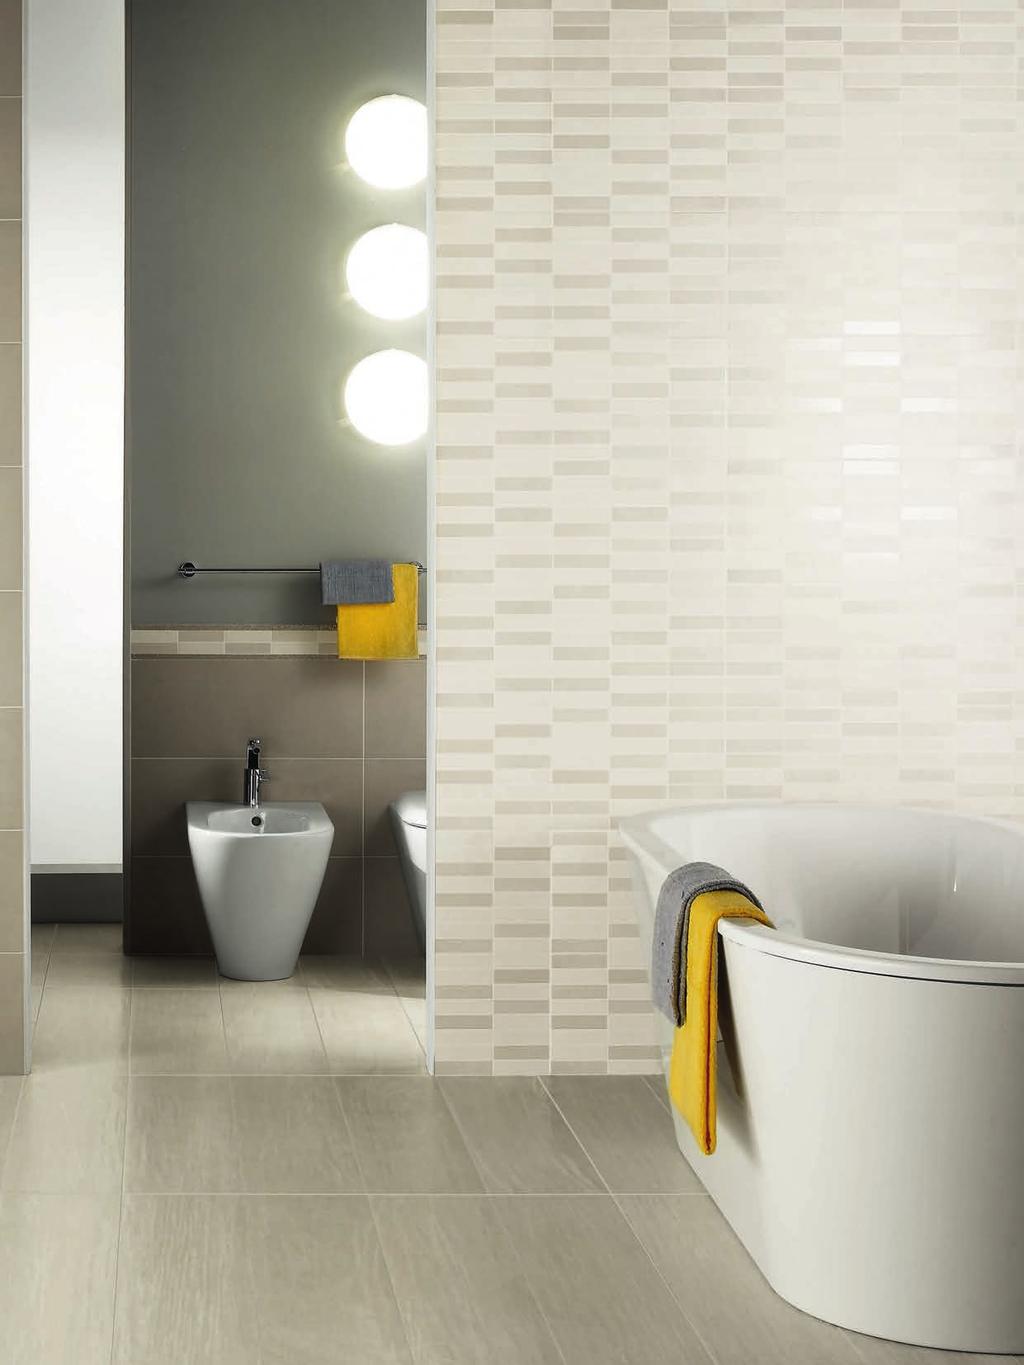 58 Manhattan Tiles On All Our Tiles *Please see www.betterbathrooms.